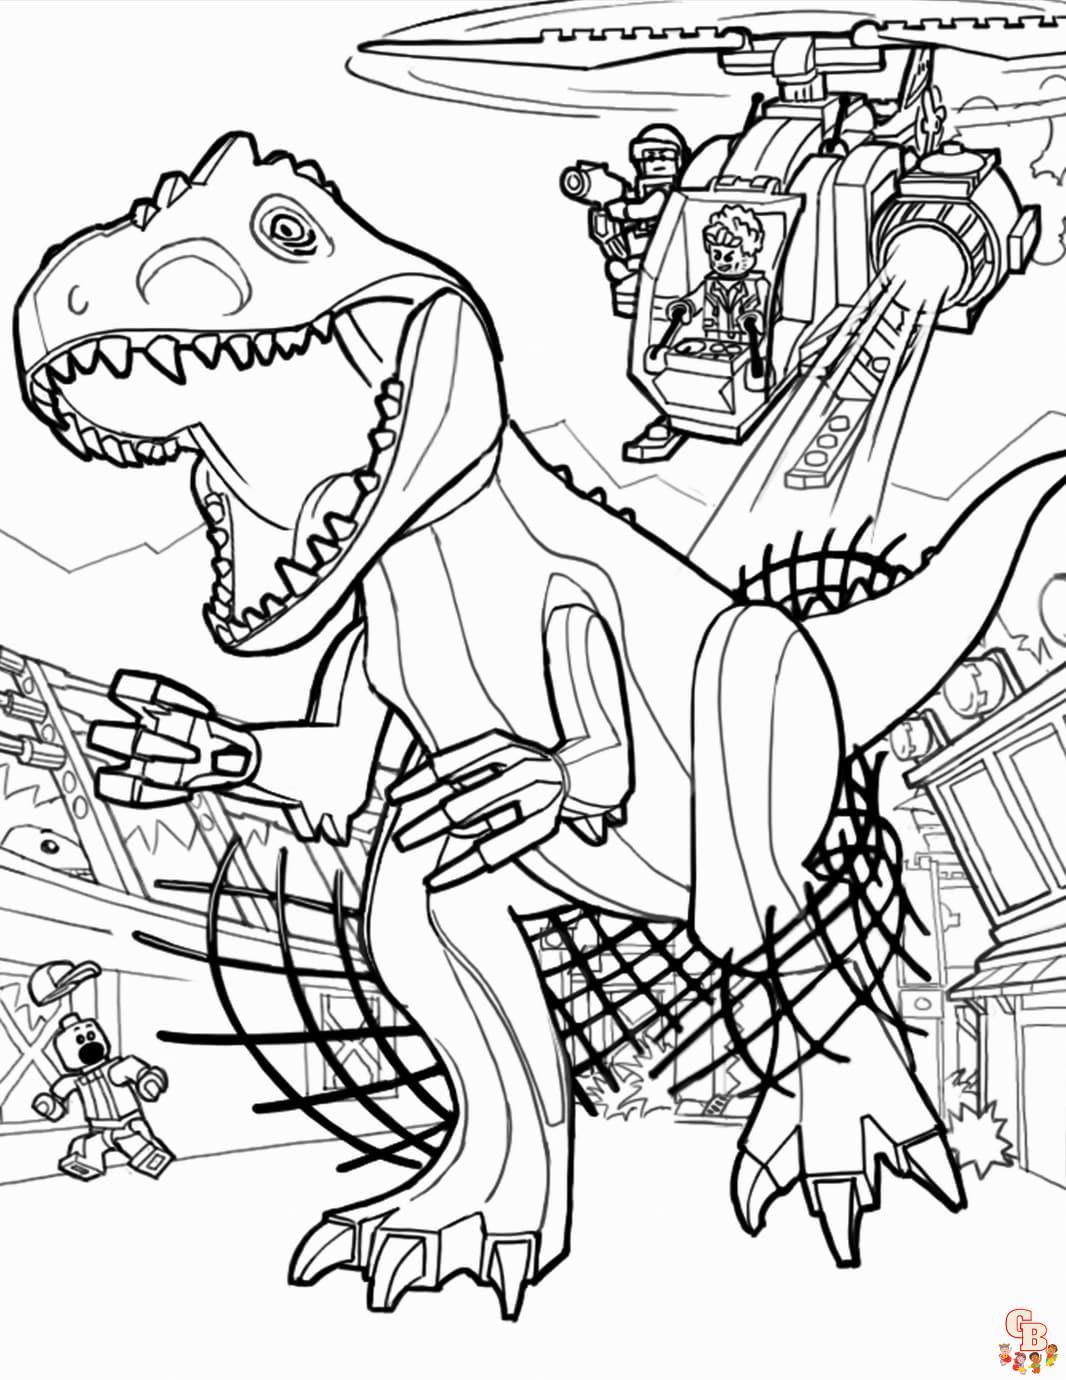 Jurassic Park coloring pages 2